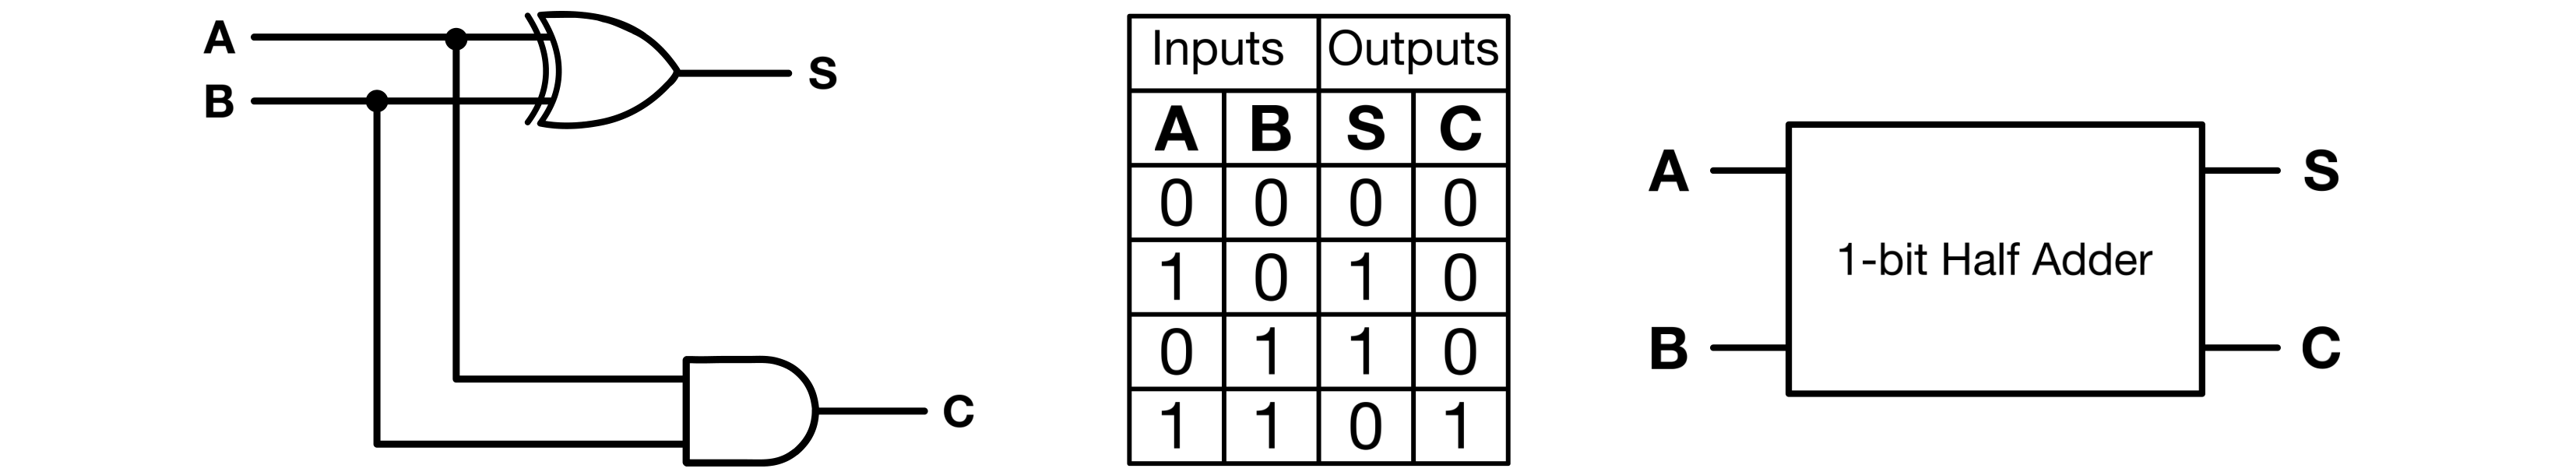 Figure 1: Half-adder- Schematic, Truth table, and Symbol